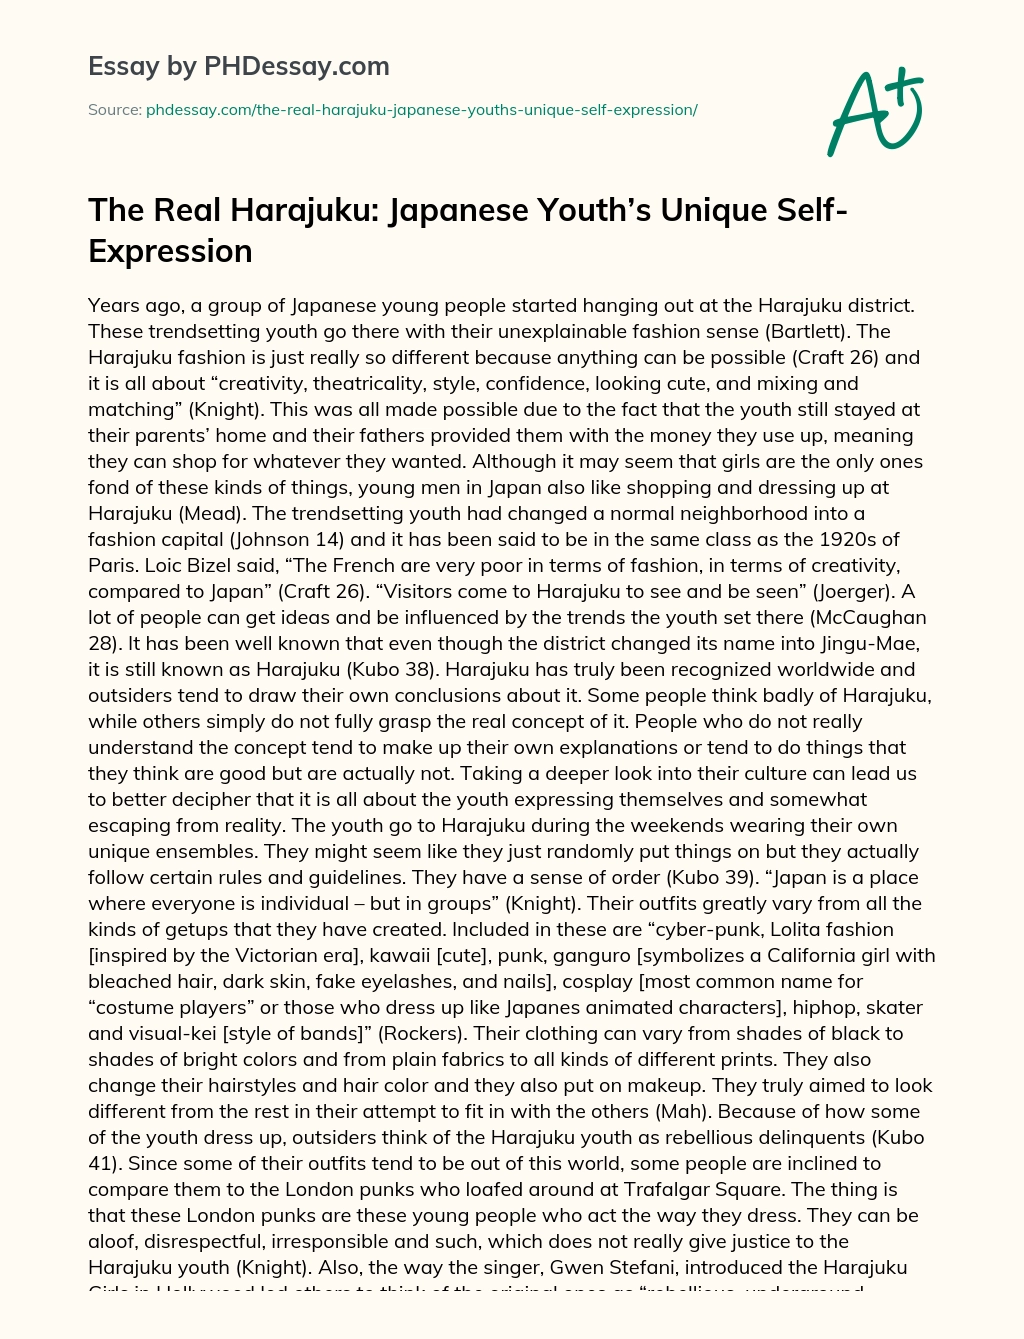 The Real Harajuku: Japanese Youth’s Unique Self-Expression essay